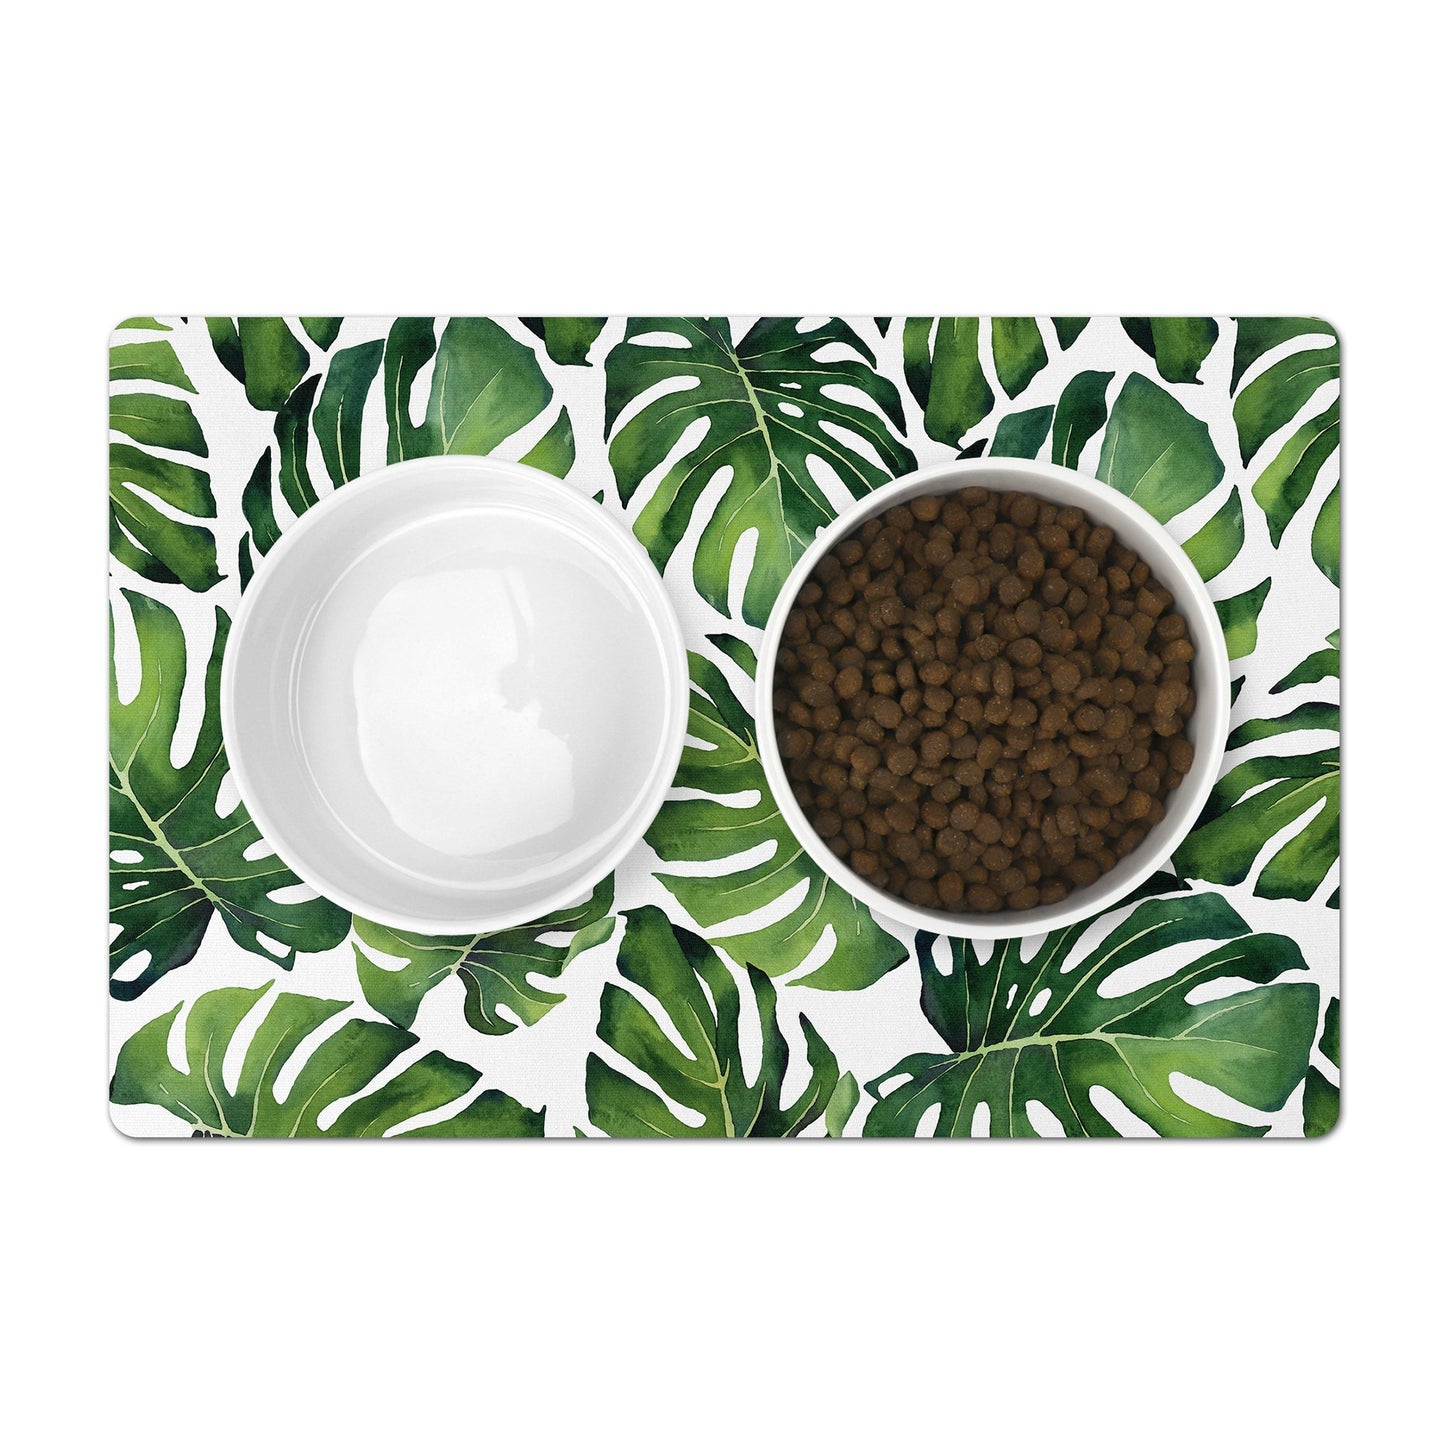 Pet bowls mat under pet food bowls with green monstera leaves on white.